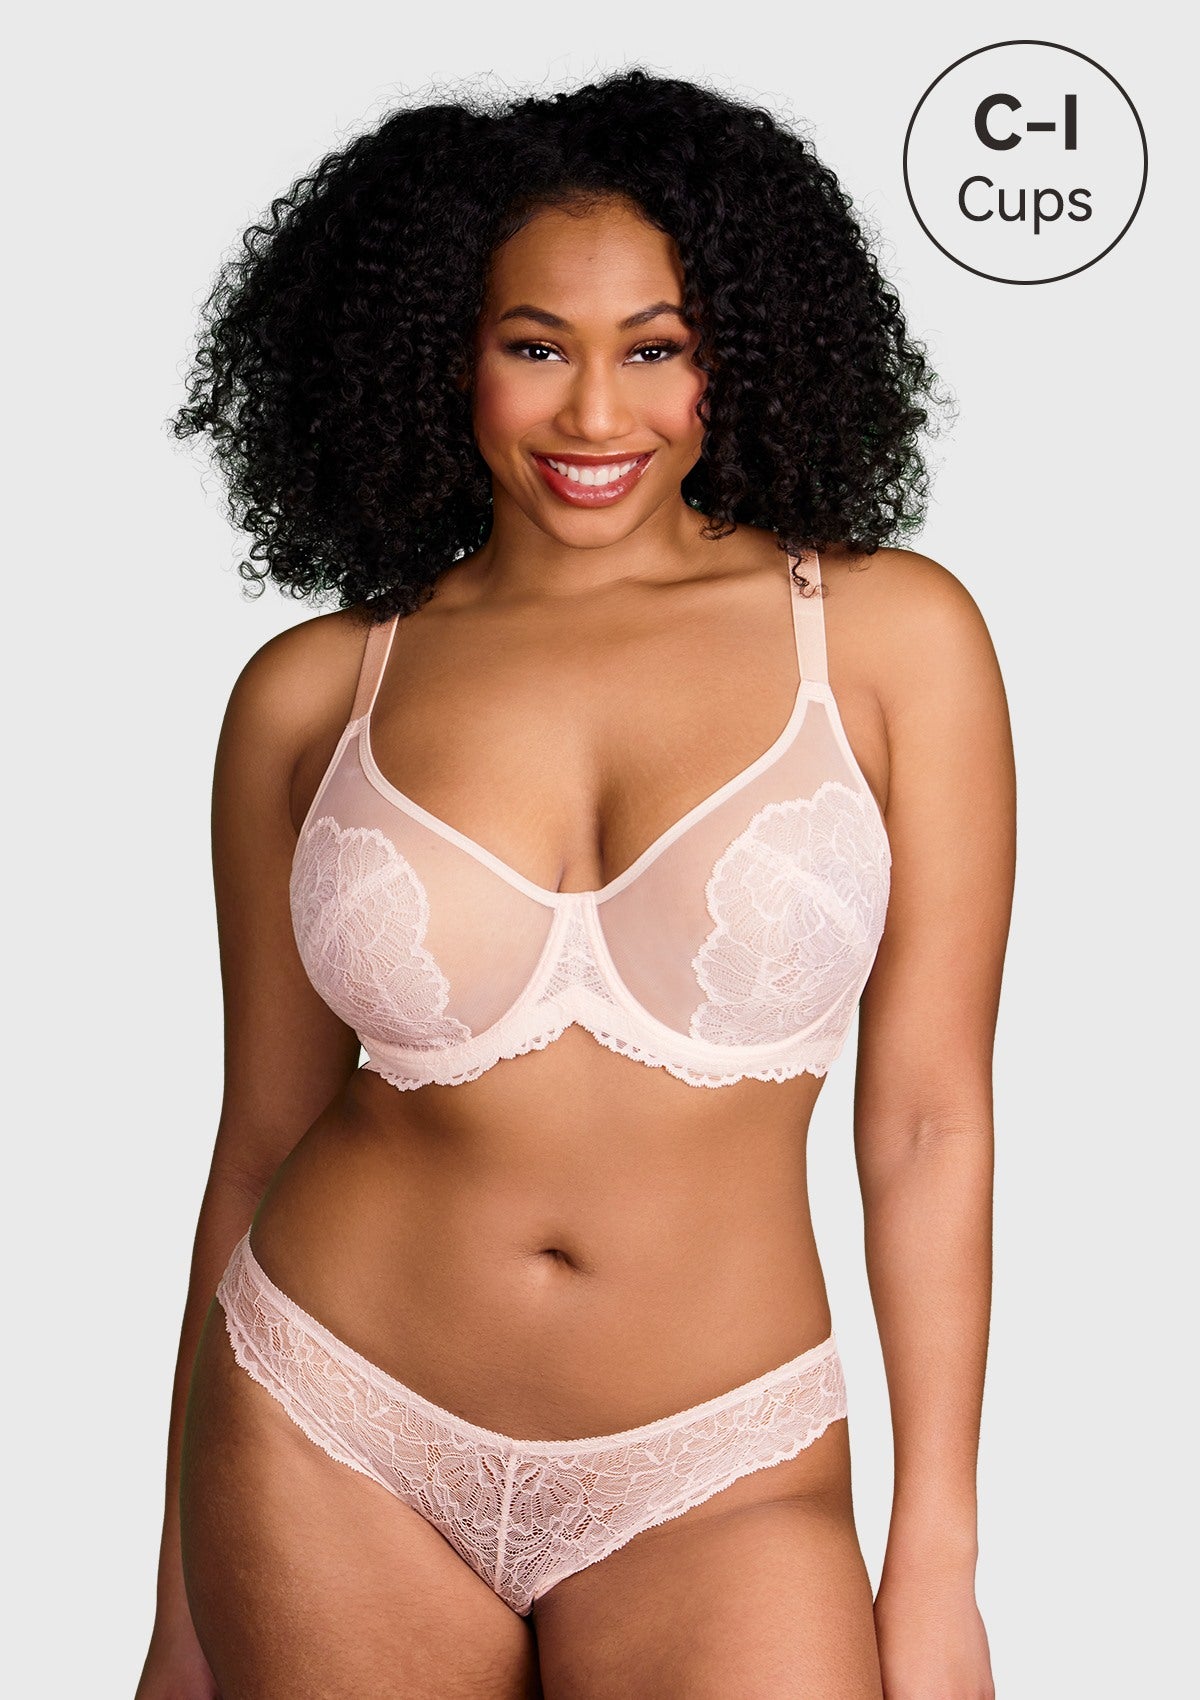 HSIA Blossom Sheer Lace Bra: Comfortable Underwire Bra For Big Busts - Dusty Peach / 40 / G